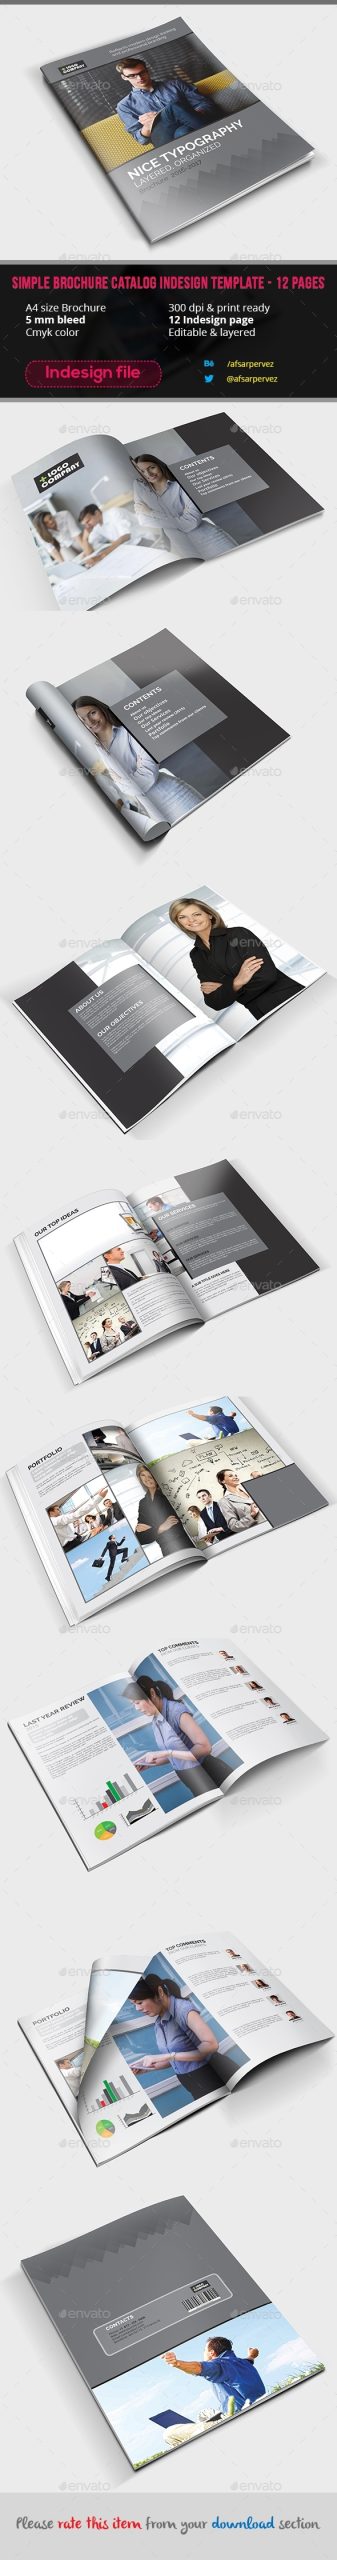 Simple Brochure Catalog Indesign Template - 12 Pages By Devinepixels For 12 Page Brochure Template